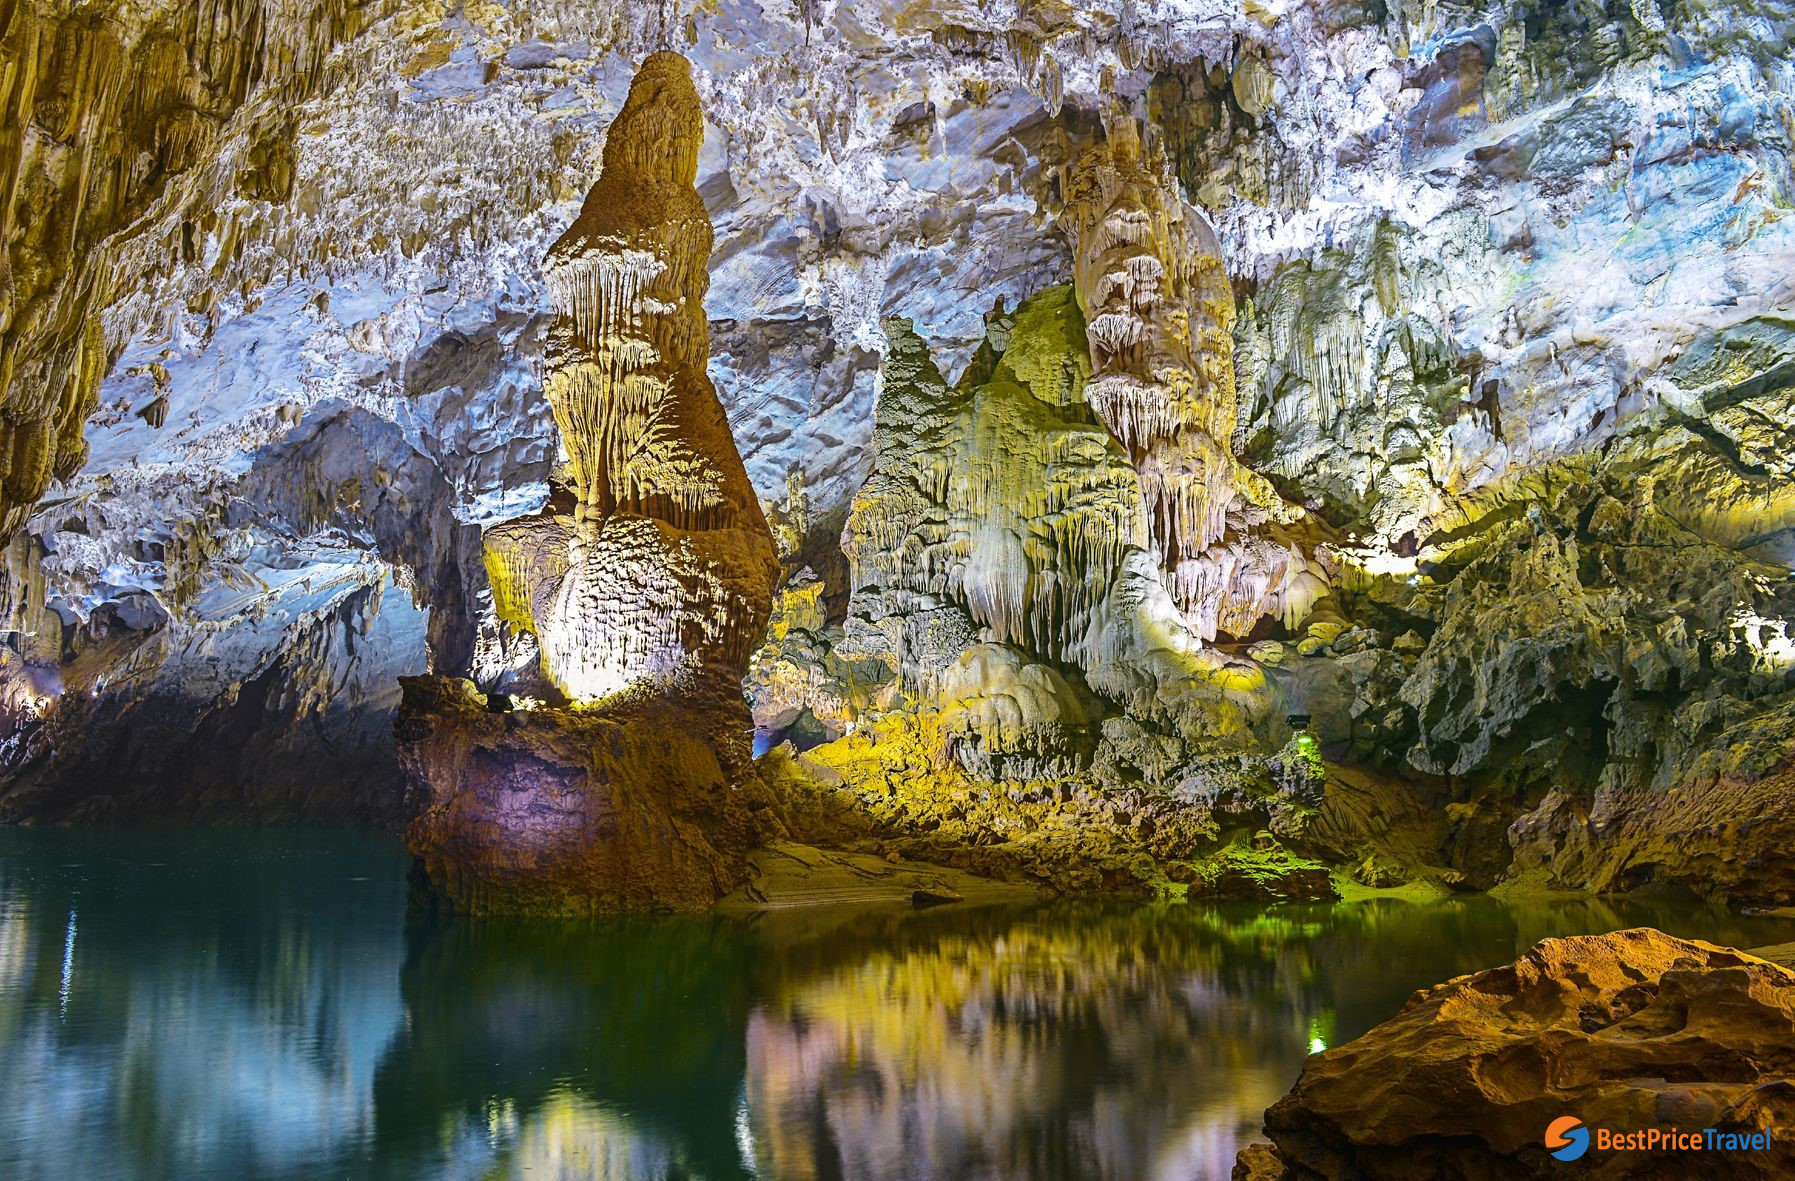 Admire the beauty of stalactites and stalagmites in Phong Nha cave